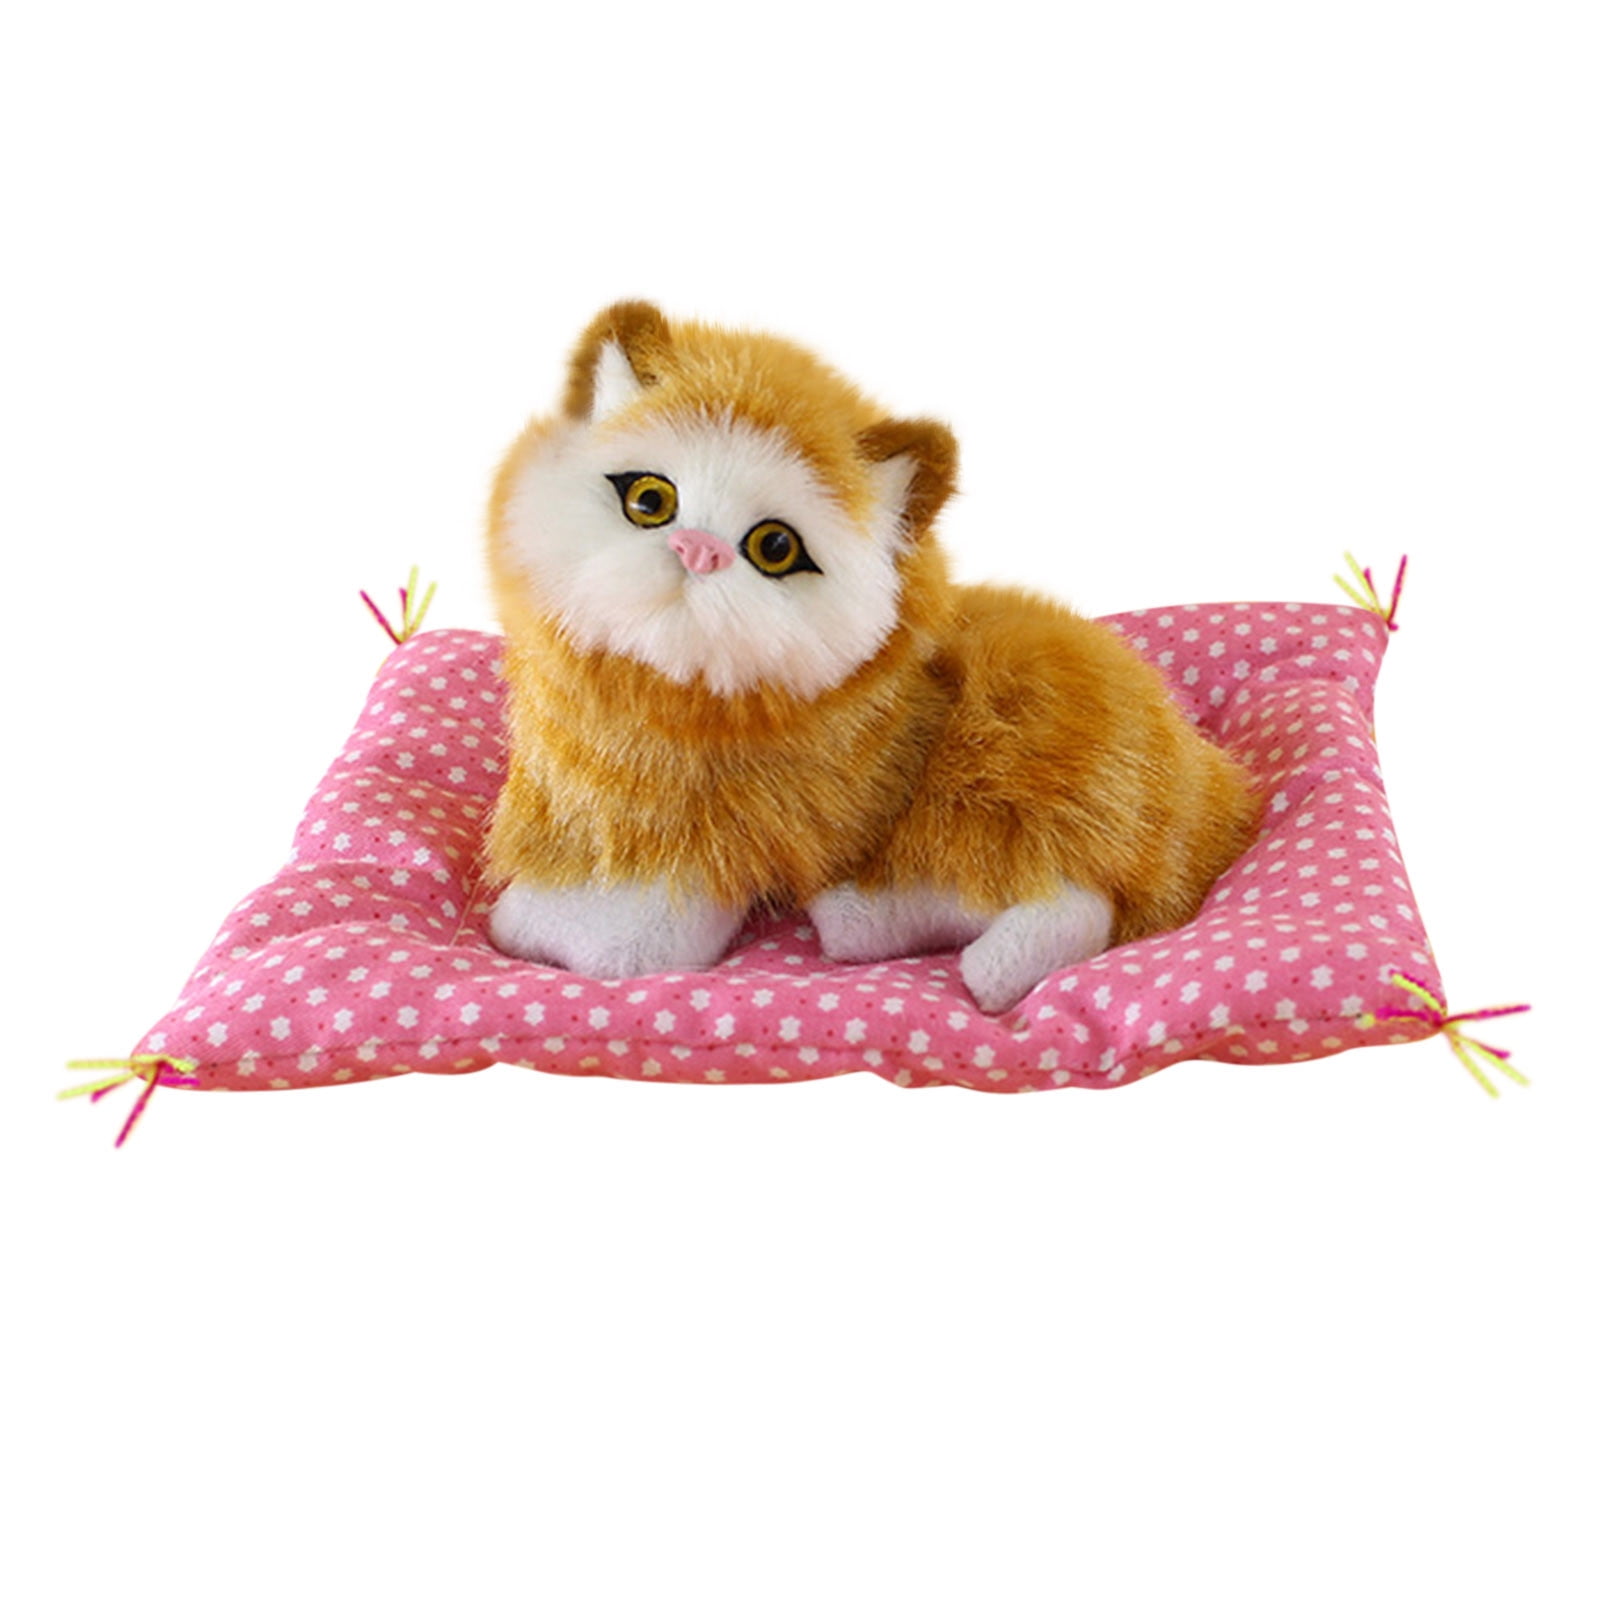 Fridja Lovely Simulation Animal Doll Plush Cat Toy with Sound Kids Toy  Decorations Stuffed Toys 6.7 inches 